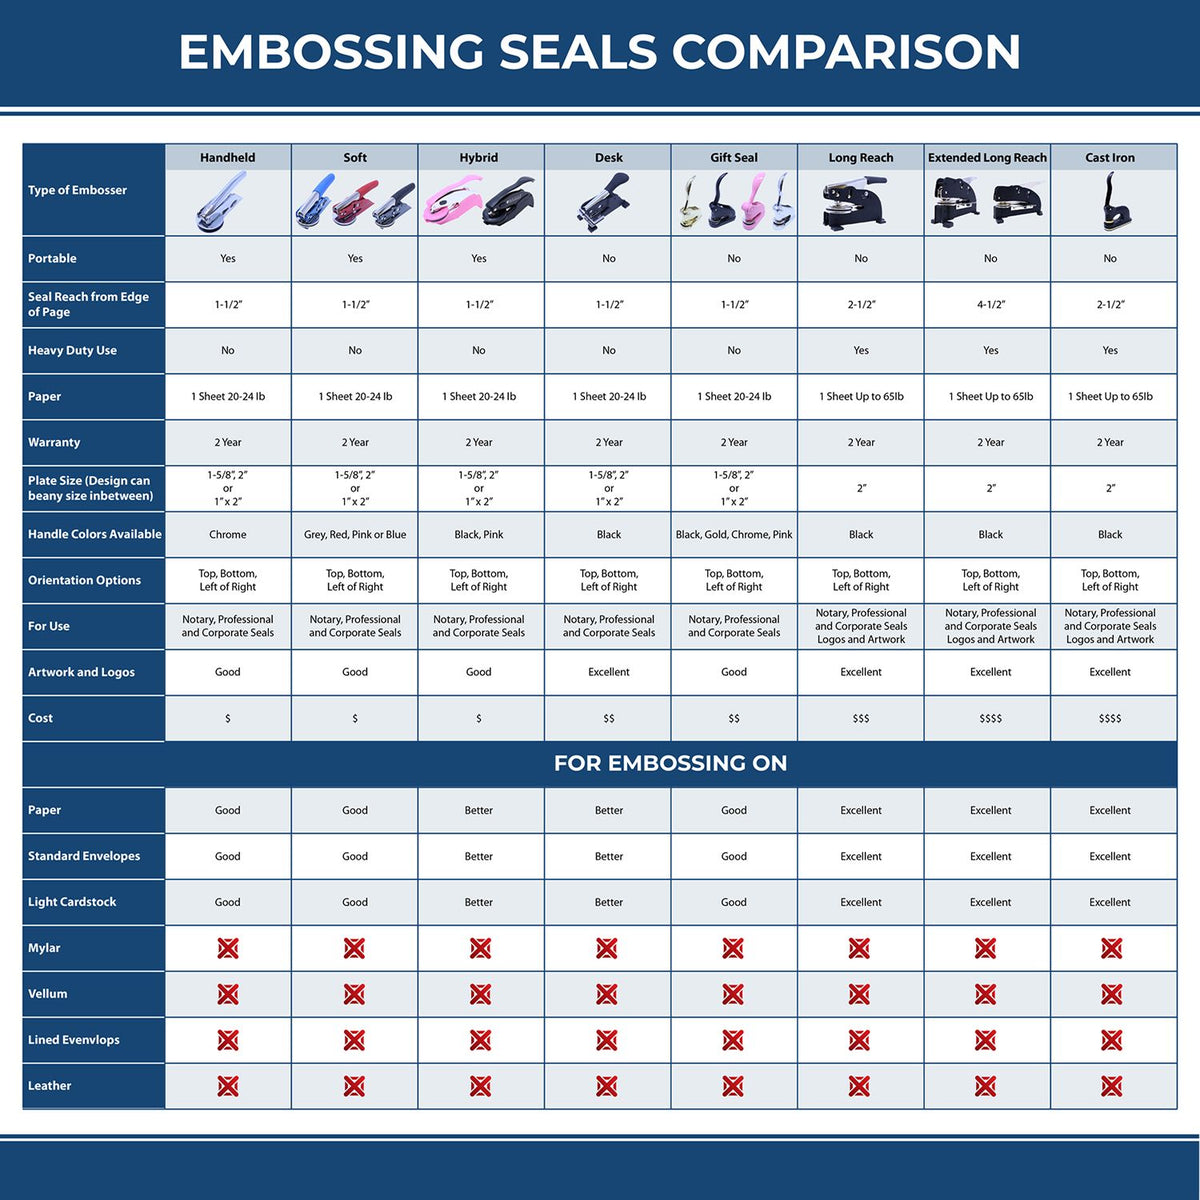 Public Weighmaster Pink Soft Seal Embosser 3036WE Embossing Seal Comparison